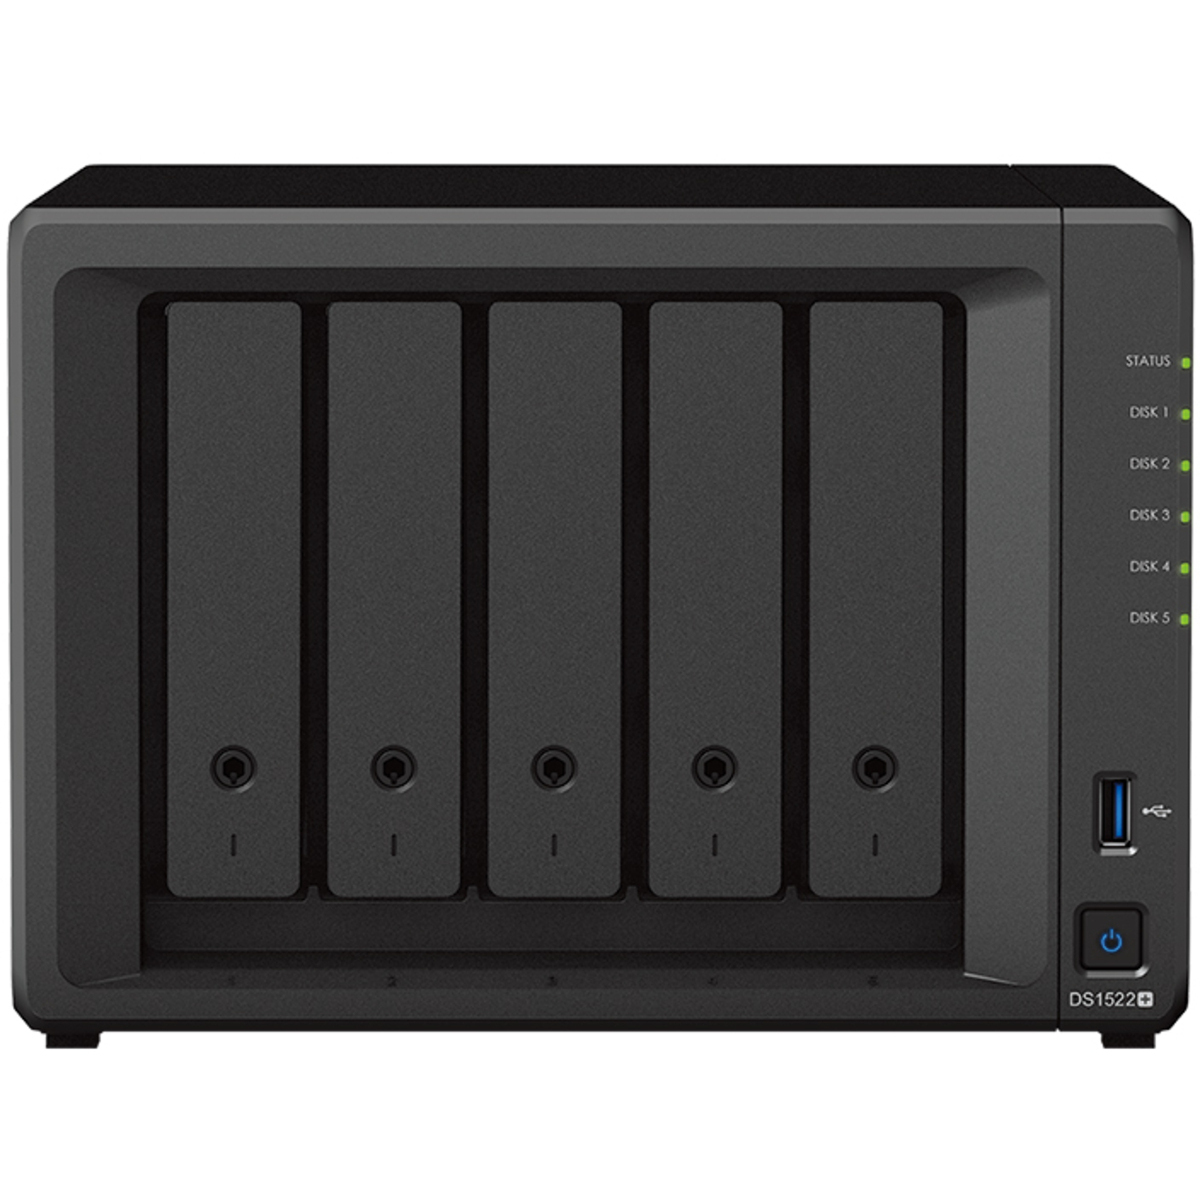 Synology DiskStation DS1522+ 120tb 5-Bay Desktop Multimedia / Power User / Business NAS - Network Attached Storage Device 5x24tb Western Digital Ultrastar HC580 SED WUH722424ALE6L1 3.5 7200rpm SATA 6Gb/s HDD ENTERPRISE Class Drives Installed - Burn-In Tested - ON SALE DiskStation DS1522+